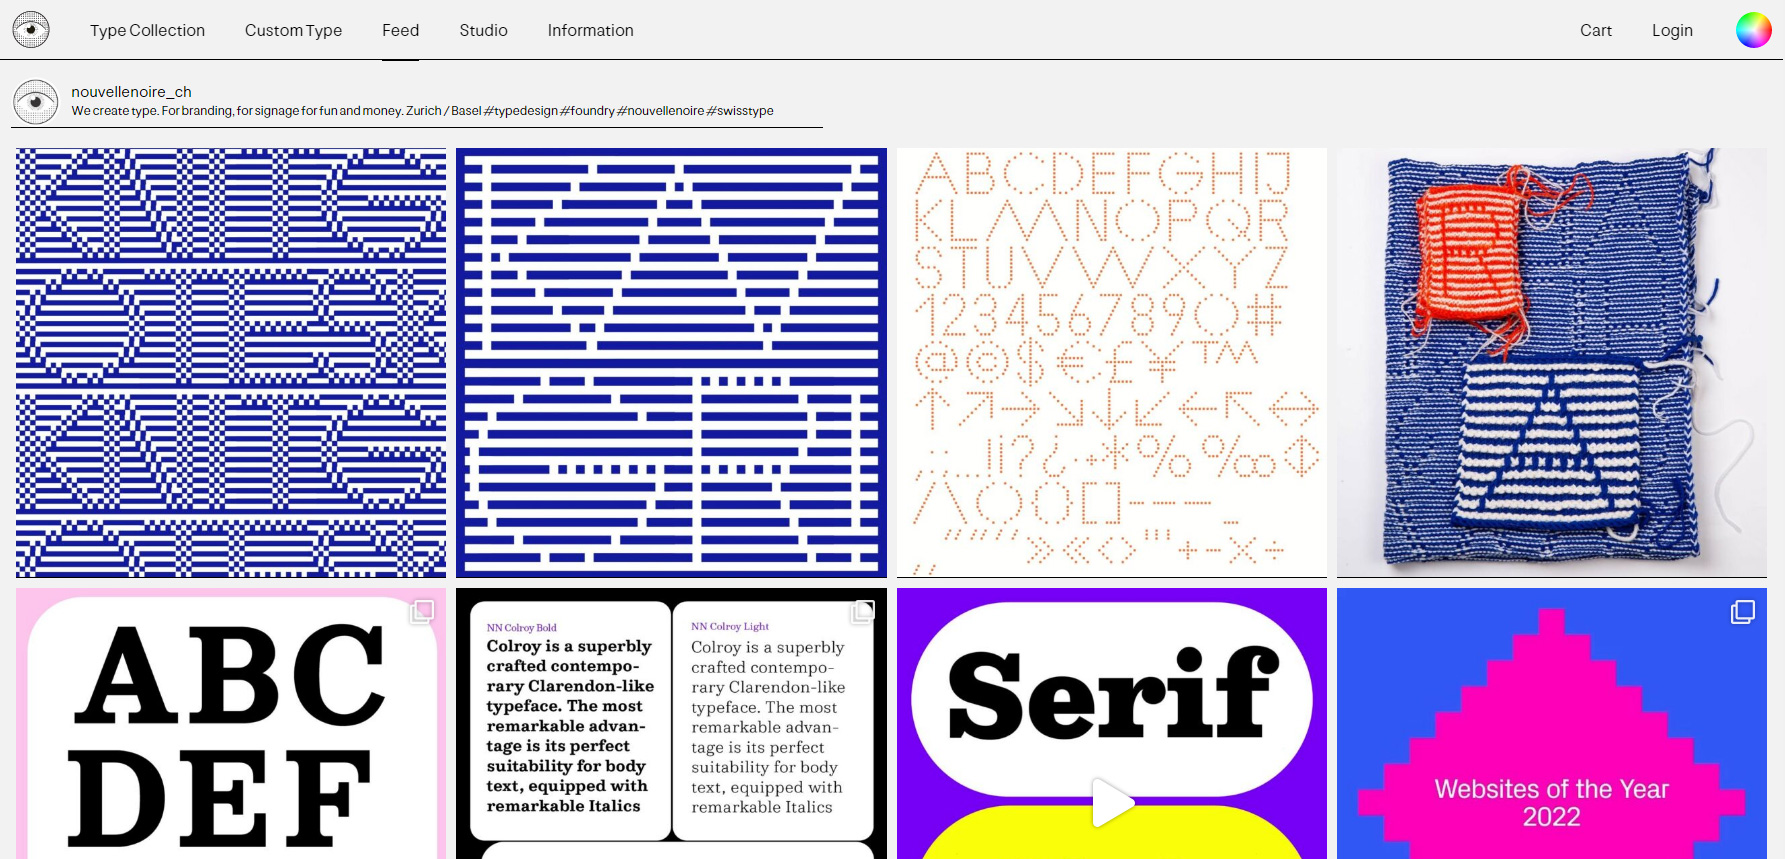 Nouvelle Noire Swiss Type Foundry - Website of the Day